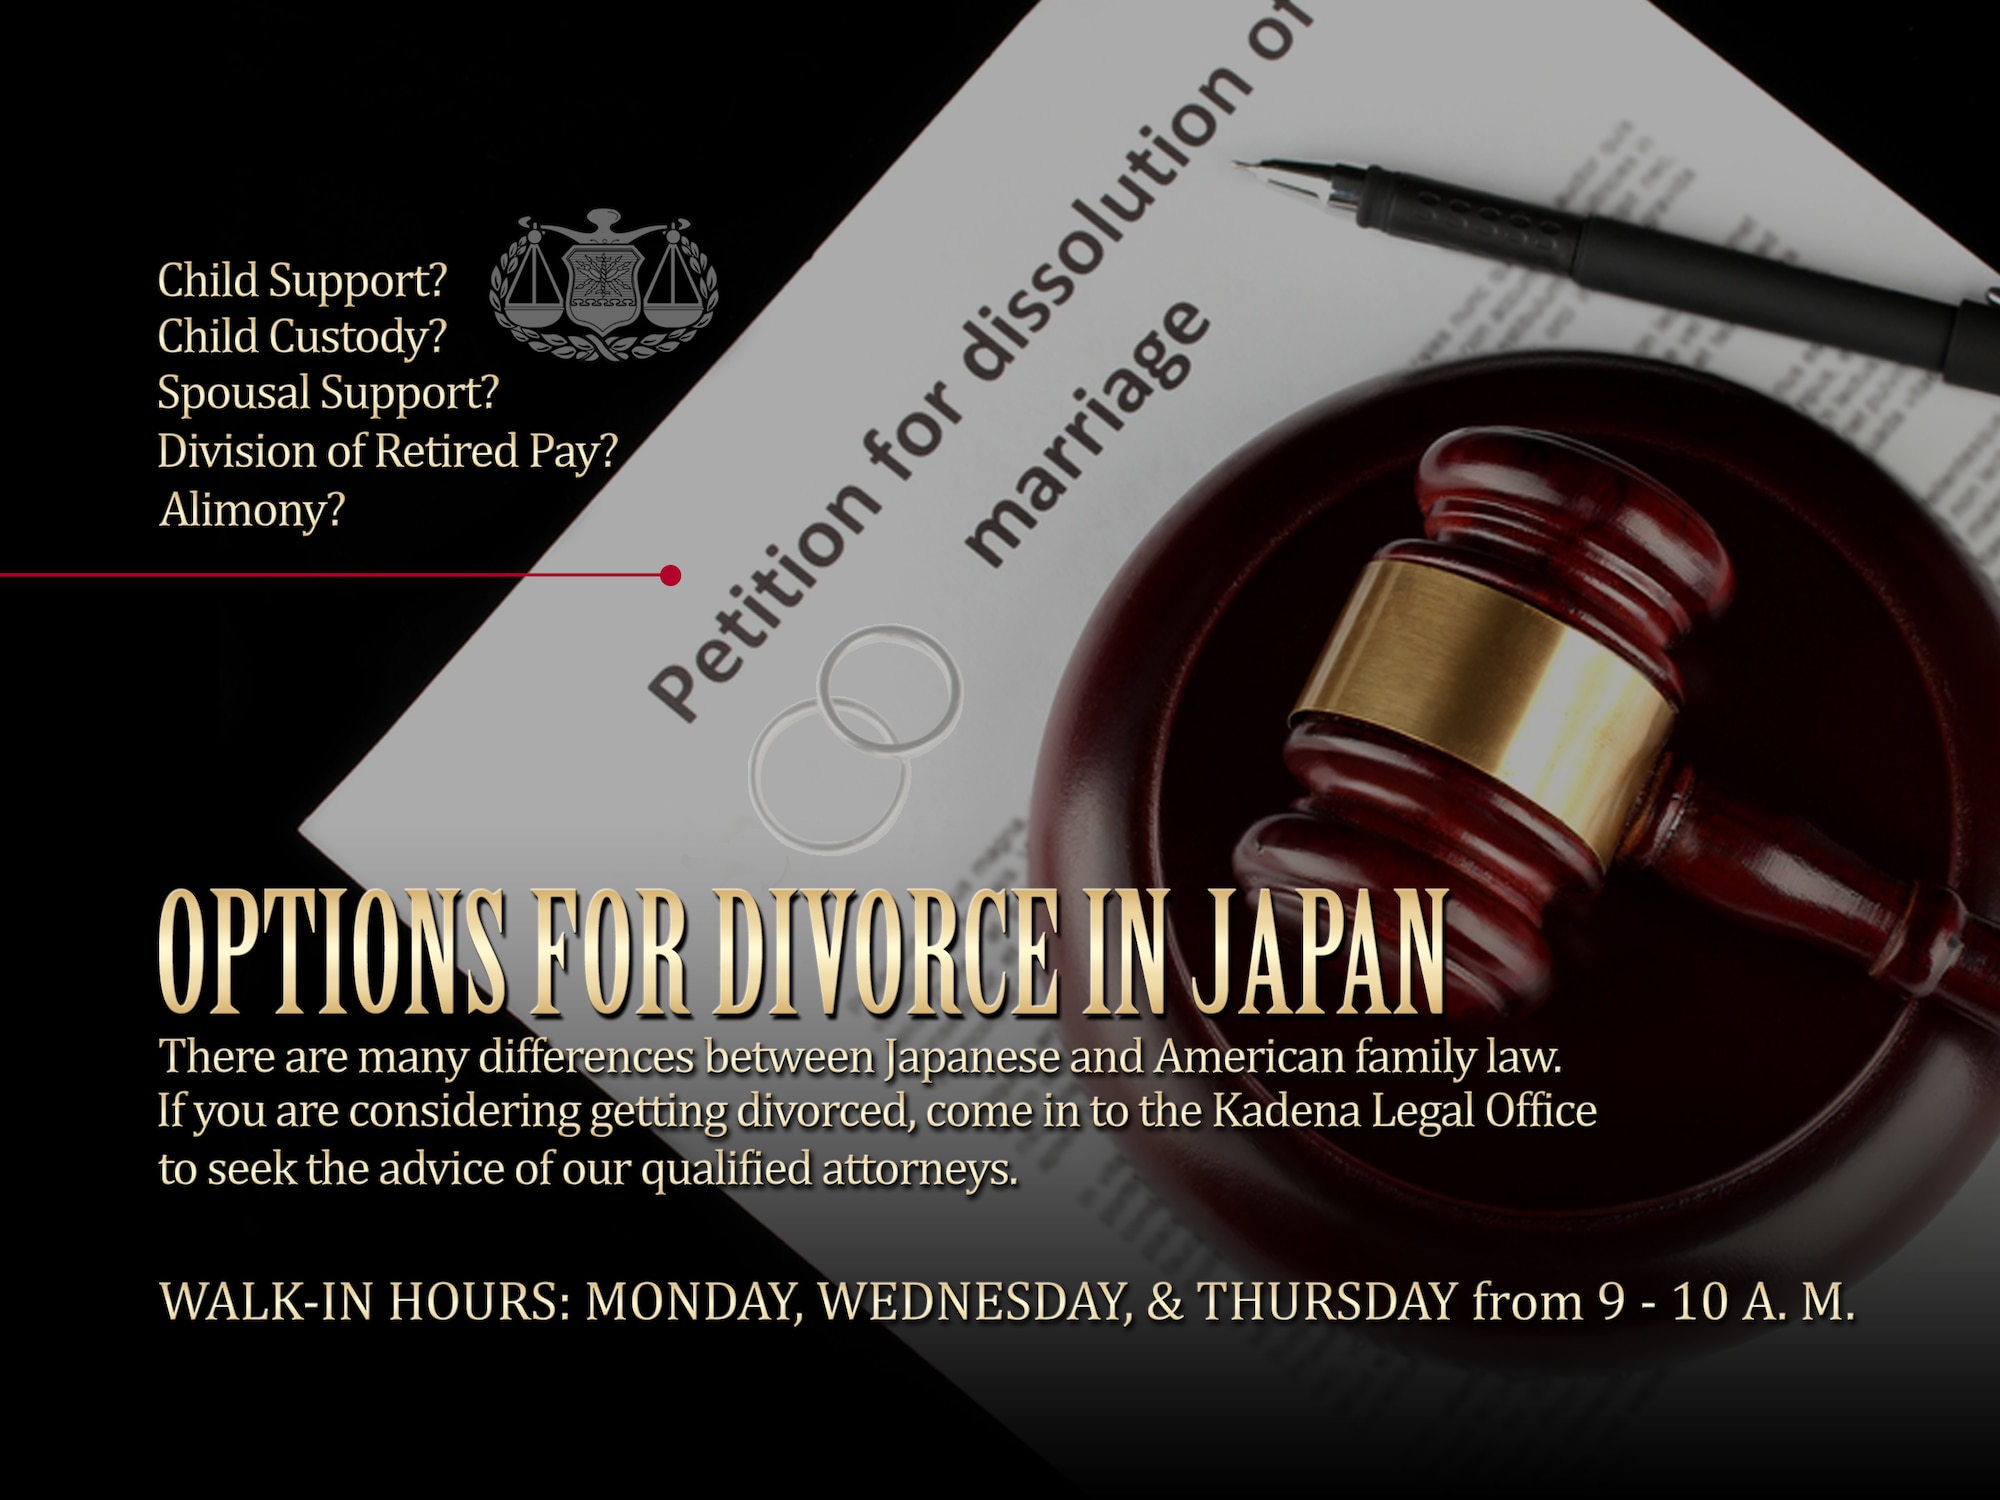 If you are considering obtaining a divorce in Japan, visit the Kadena Legal Office to seek the advice of qualified attorneys.  They will inform you of your legal rights, your options for obtaining a divorce, the pros and cons of each option, and can also provide a list of English-speaking Japanese attorneys who will be able to assist you if needed. (U.S. Air Force graphic by Naoko Shimoji)